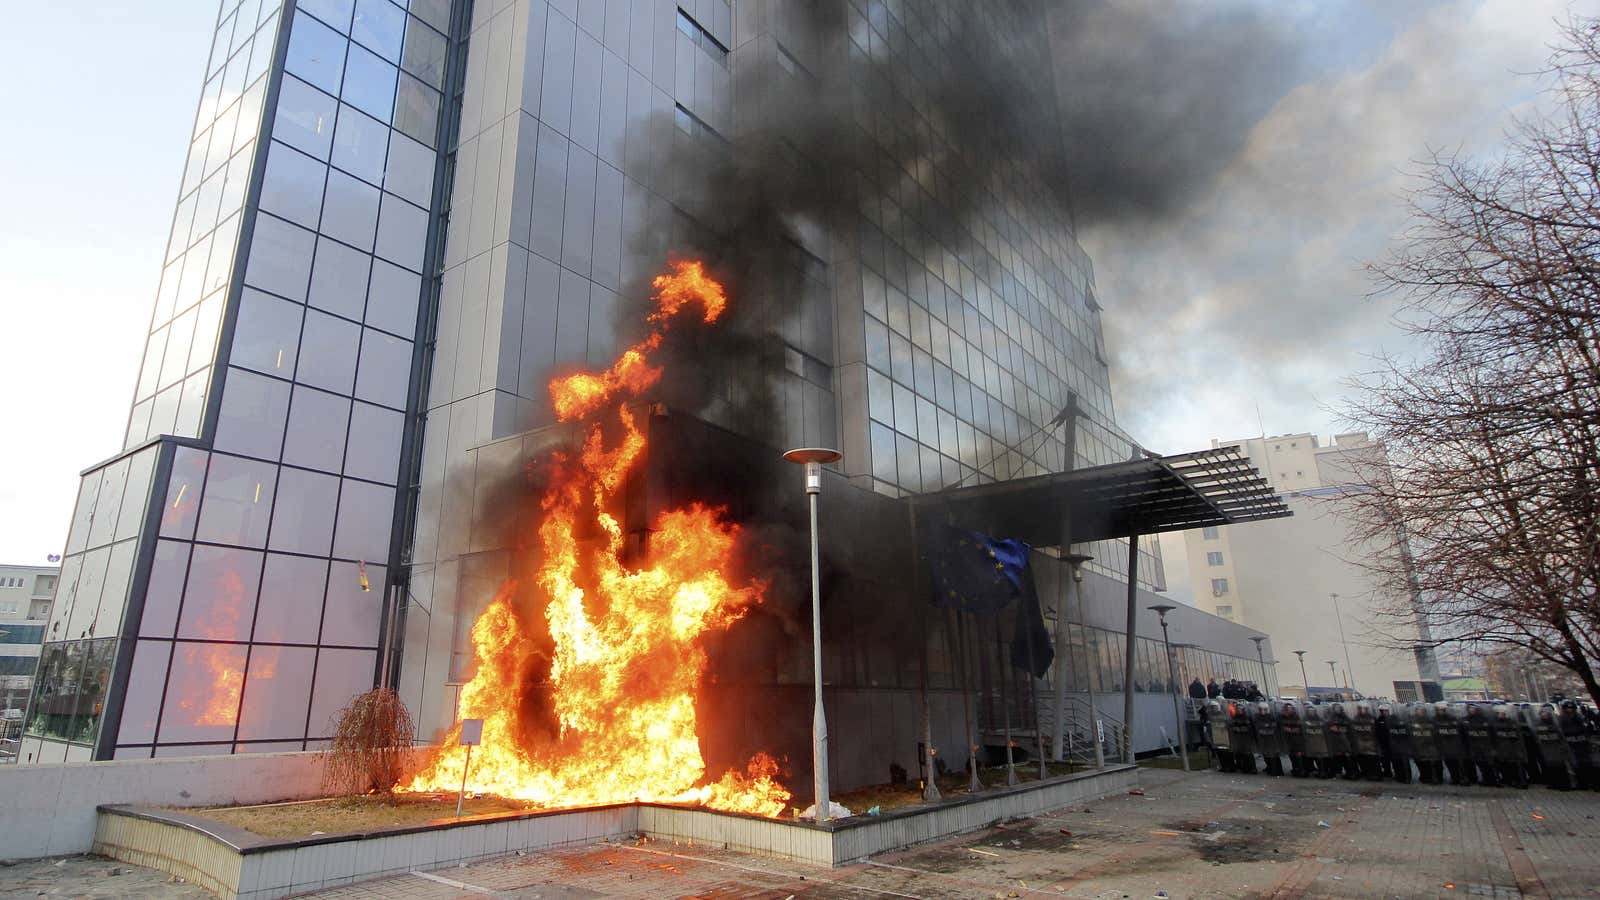 A portion of the national government headquarters in Pristina, Kosovo, burns.